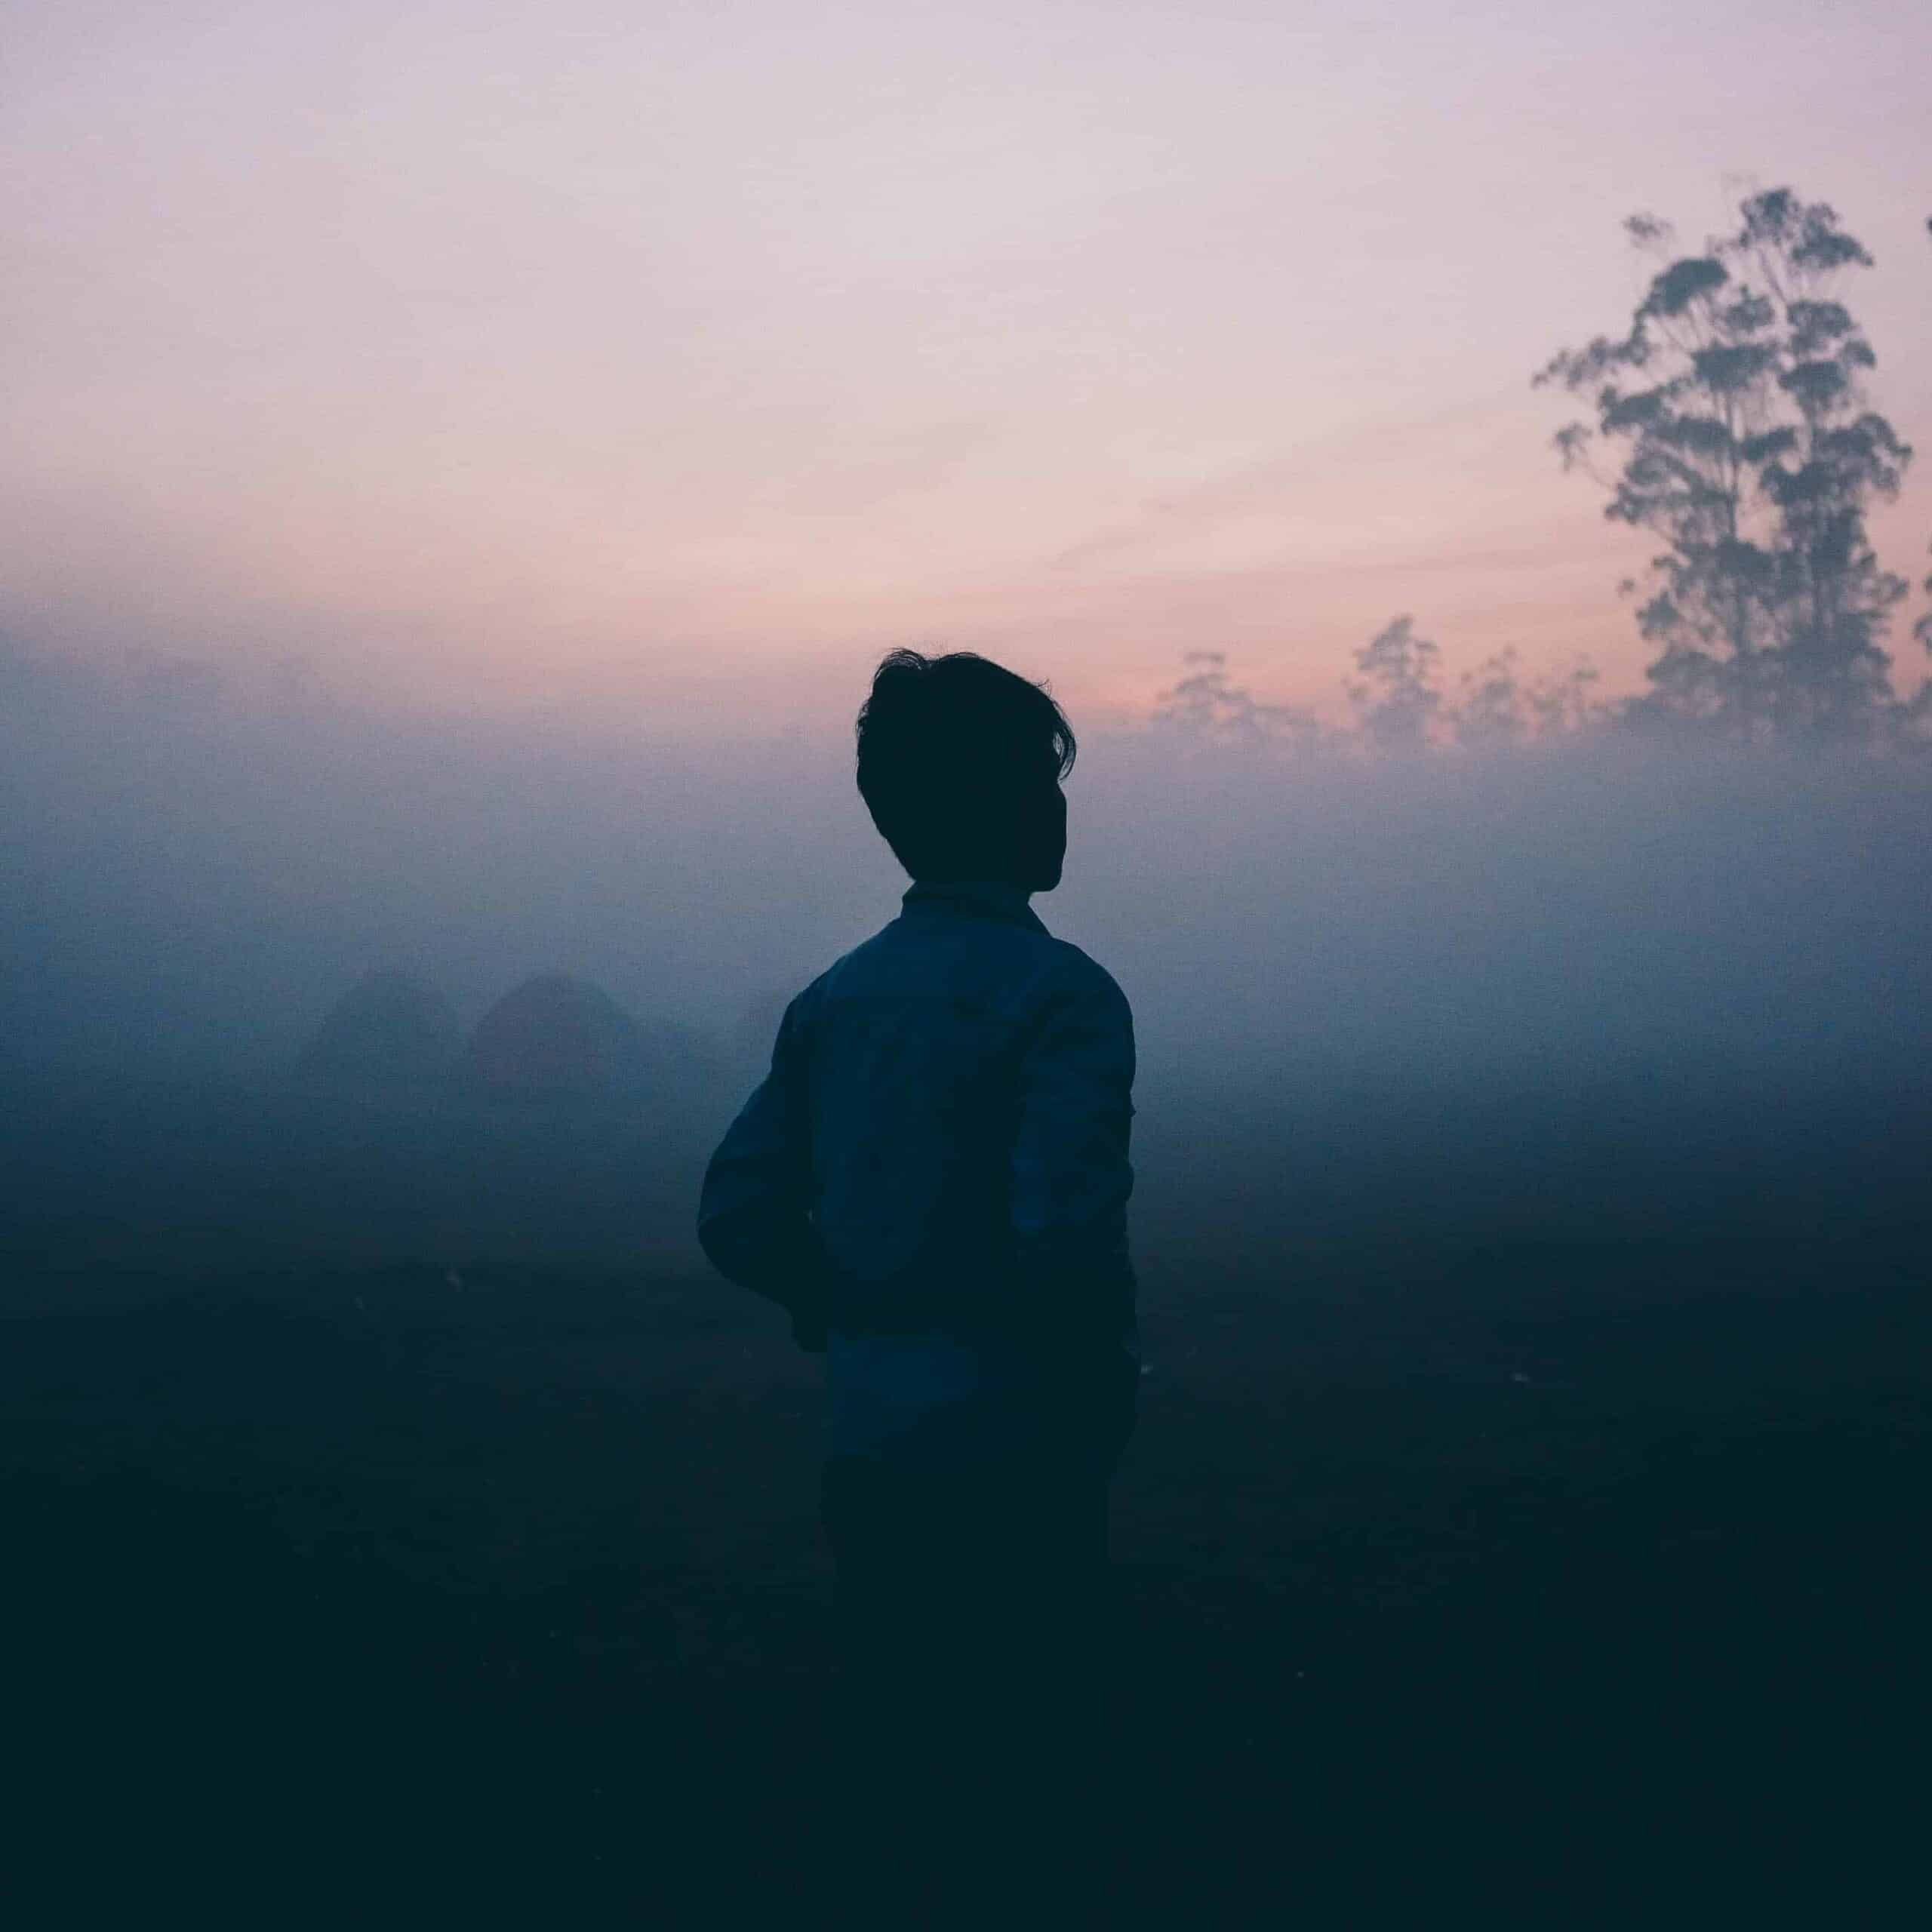 A person standing in a field on a  misty morning.